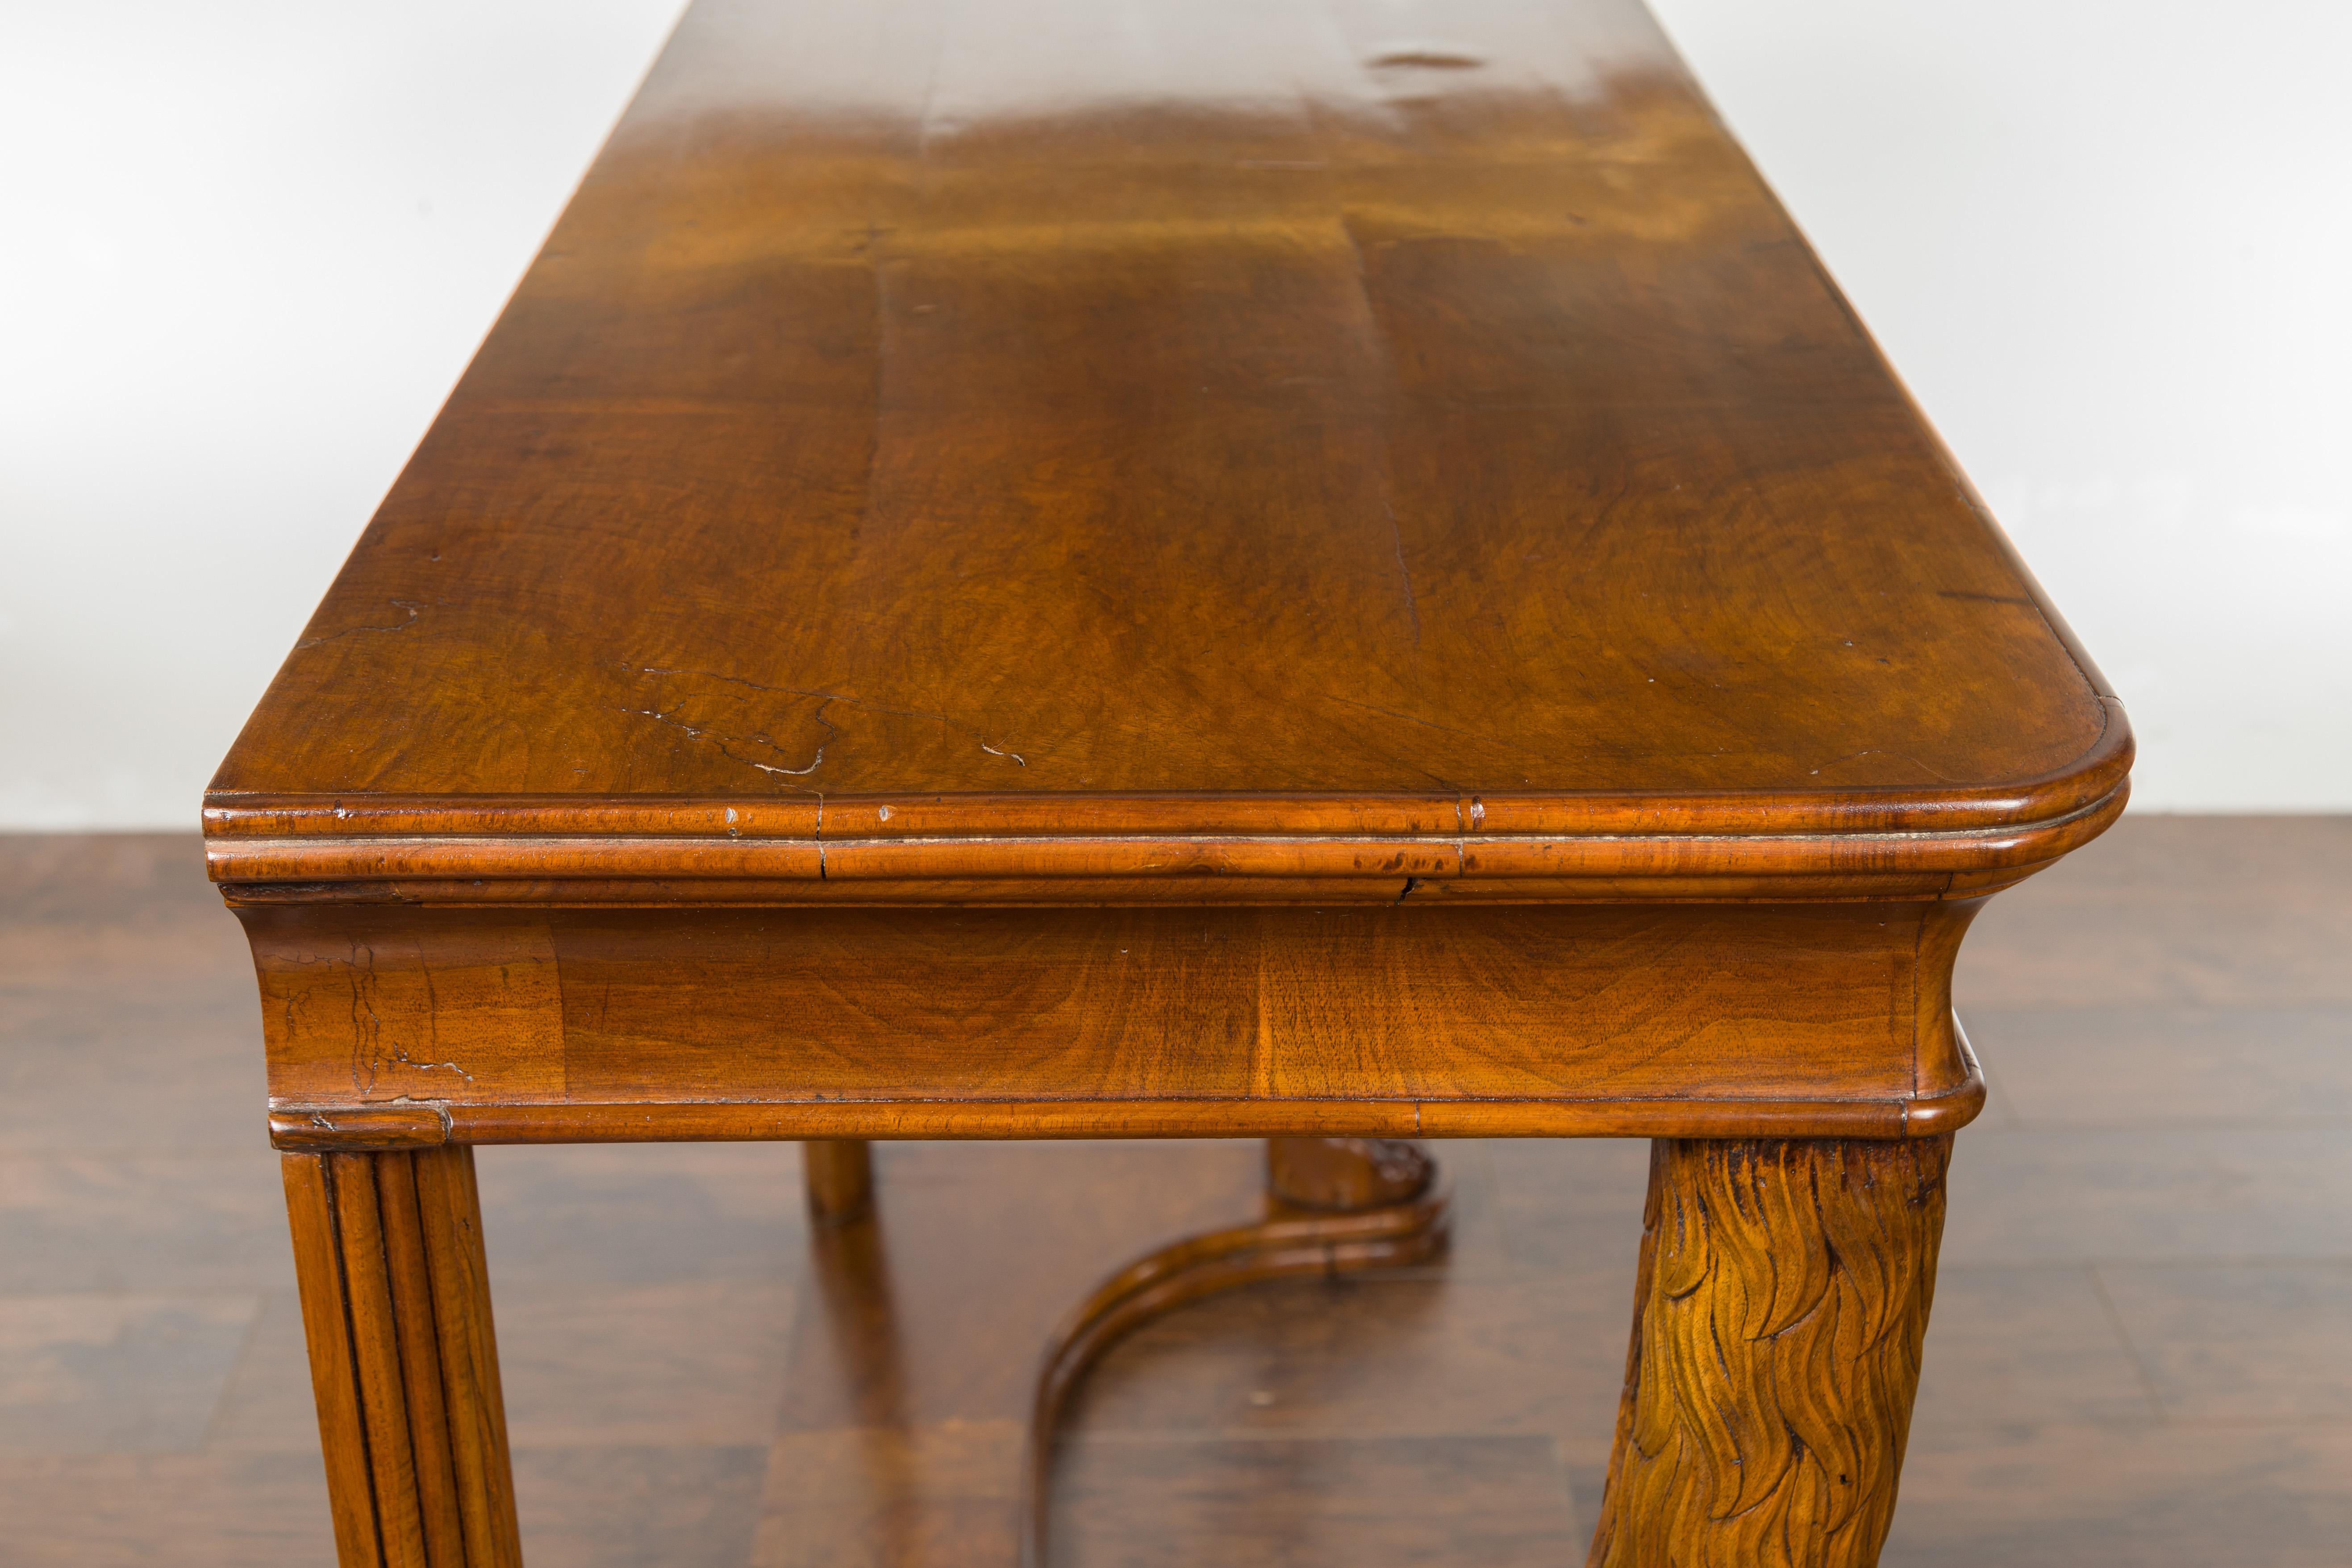 Biedermeier Period 1840s Walnut Console Table with Fur Style Legs and Paw Feet 13